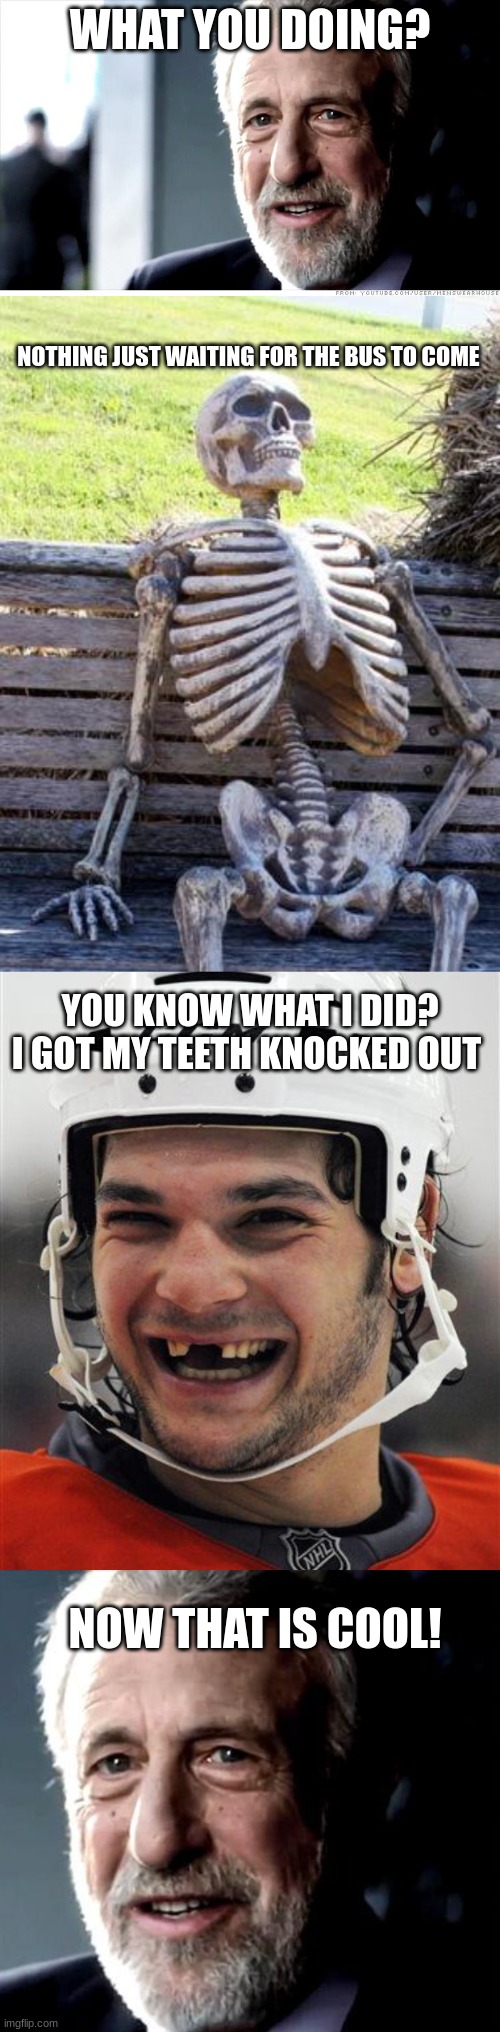 What are you doing? | WHAT YOU DOING? NOTHING JUST WAITING FOR THE BUS TO COME; YOU KNOW WHAT I DID? I GOT MY TEETH KNOCKED OUT; NOW THAT IS COOL! | image tagged in memes,i guarantee it,waiting skeleton,hockey teeth | made w/ Imgflip meme maker